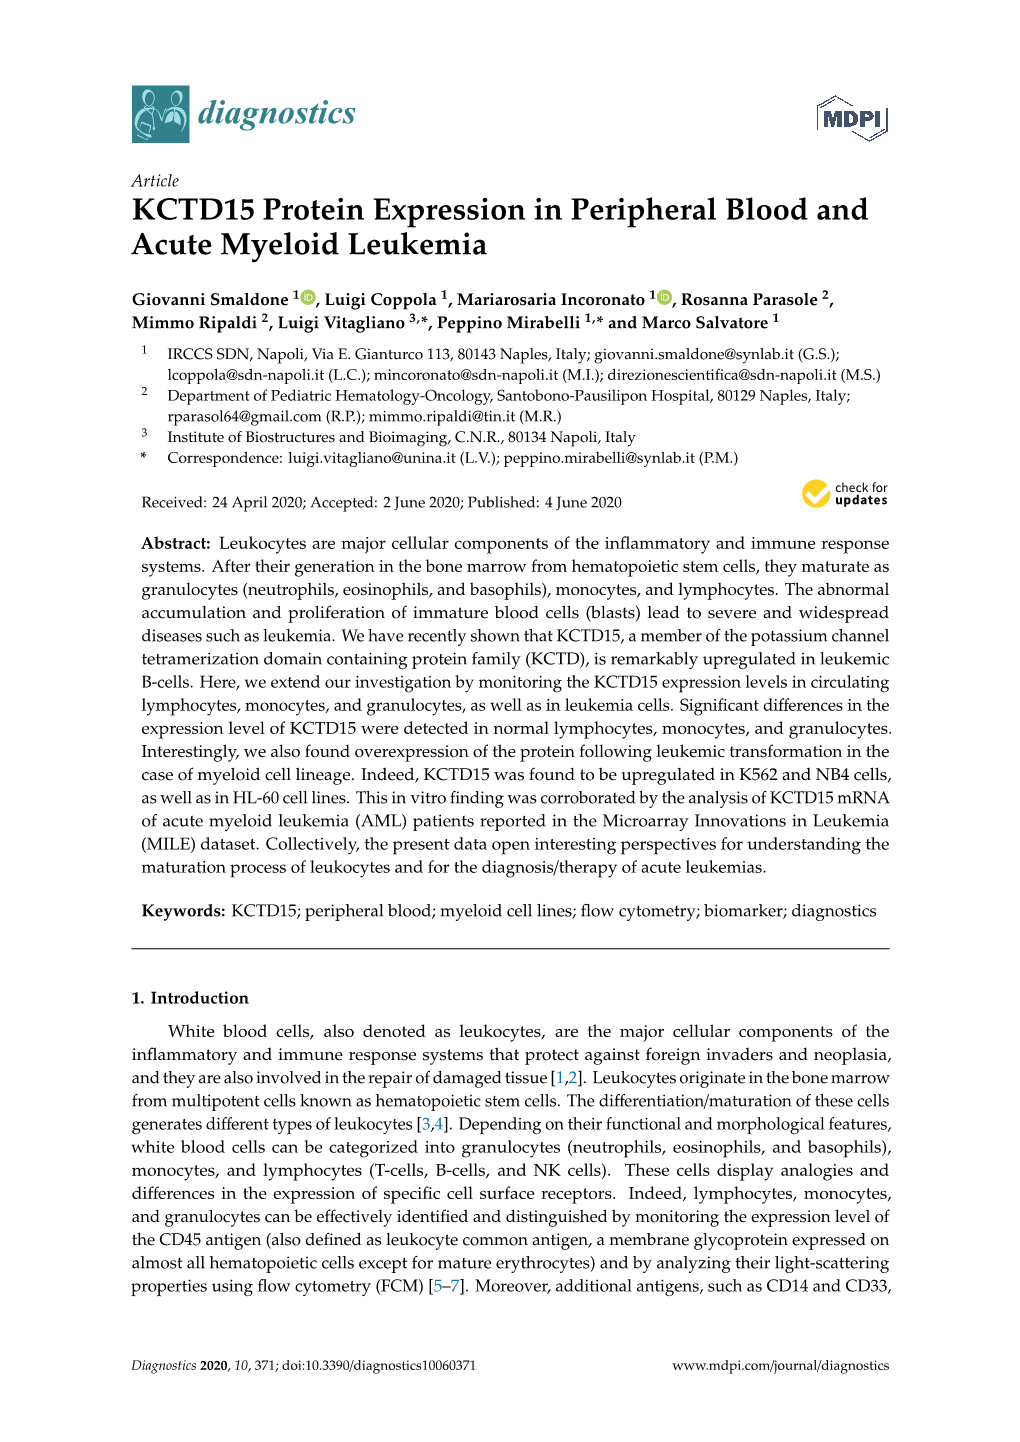 KCTD15 Protein Expression in Peripheral Blood and Acute Myeloid Leukemia